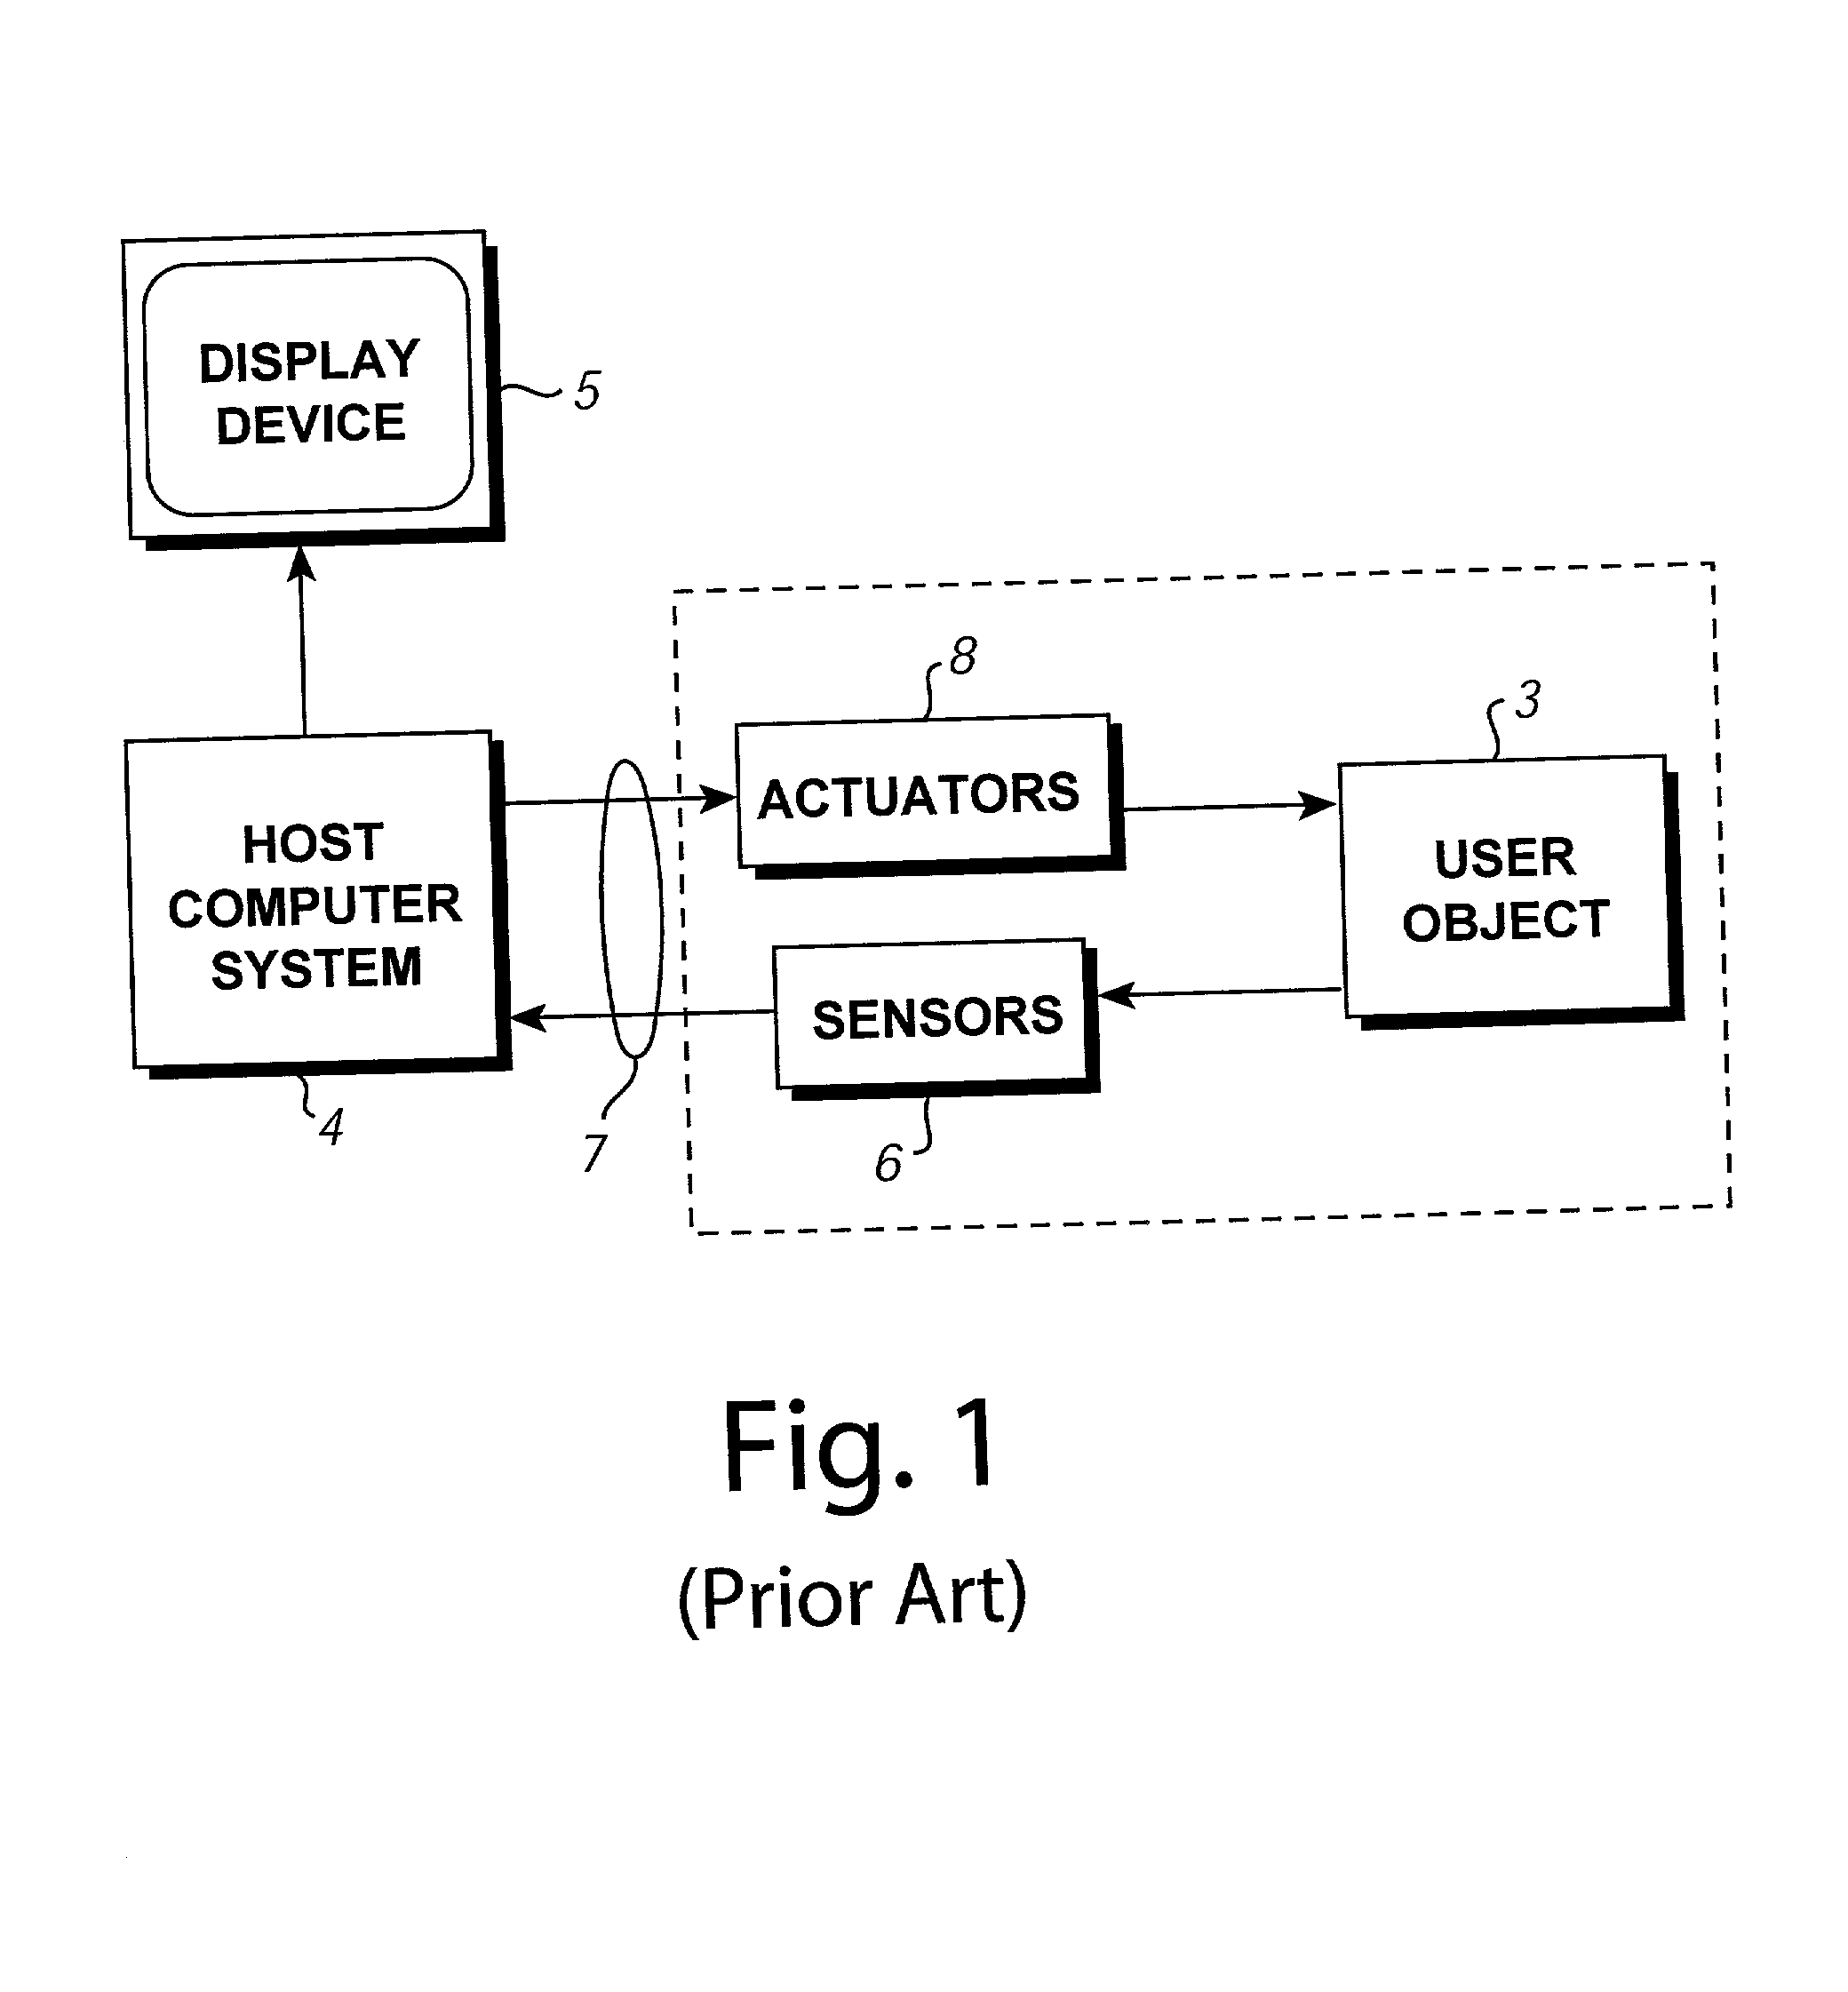 Power management for interface devices applying forces